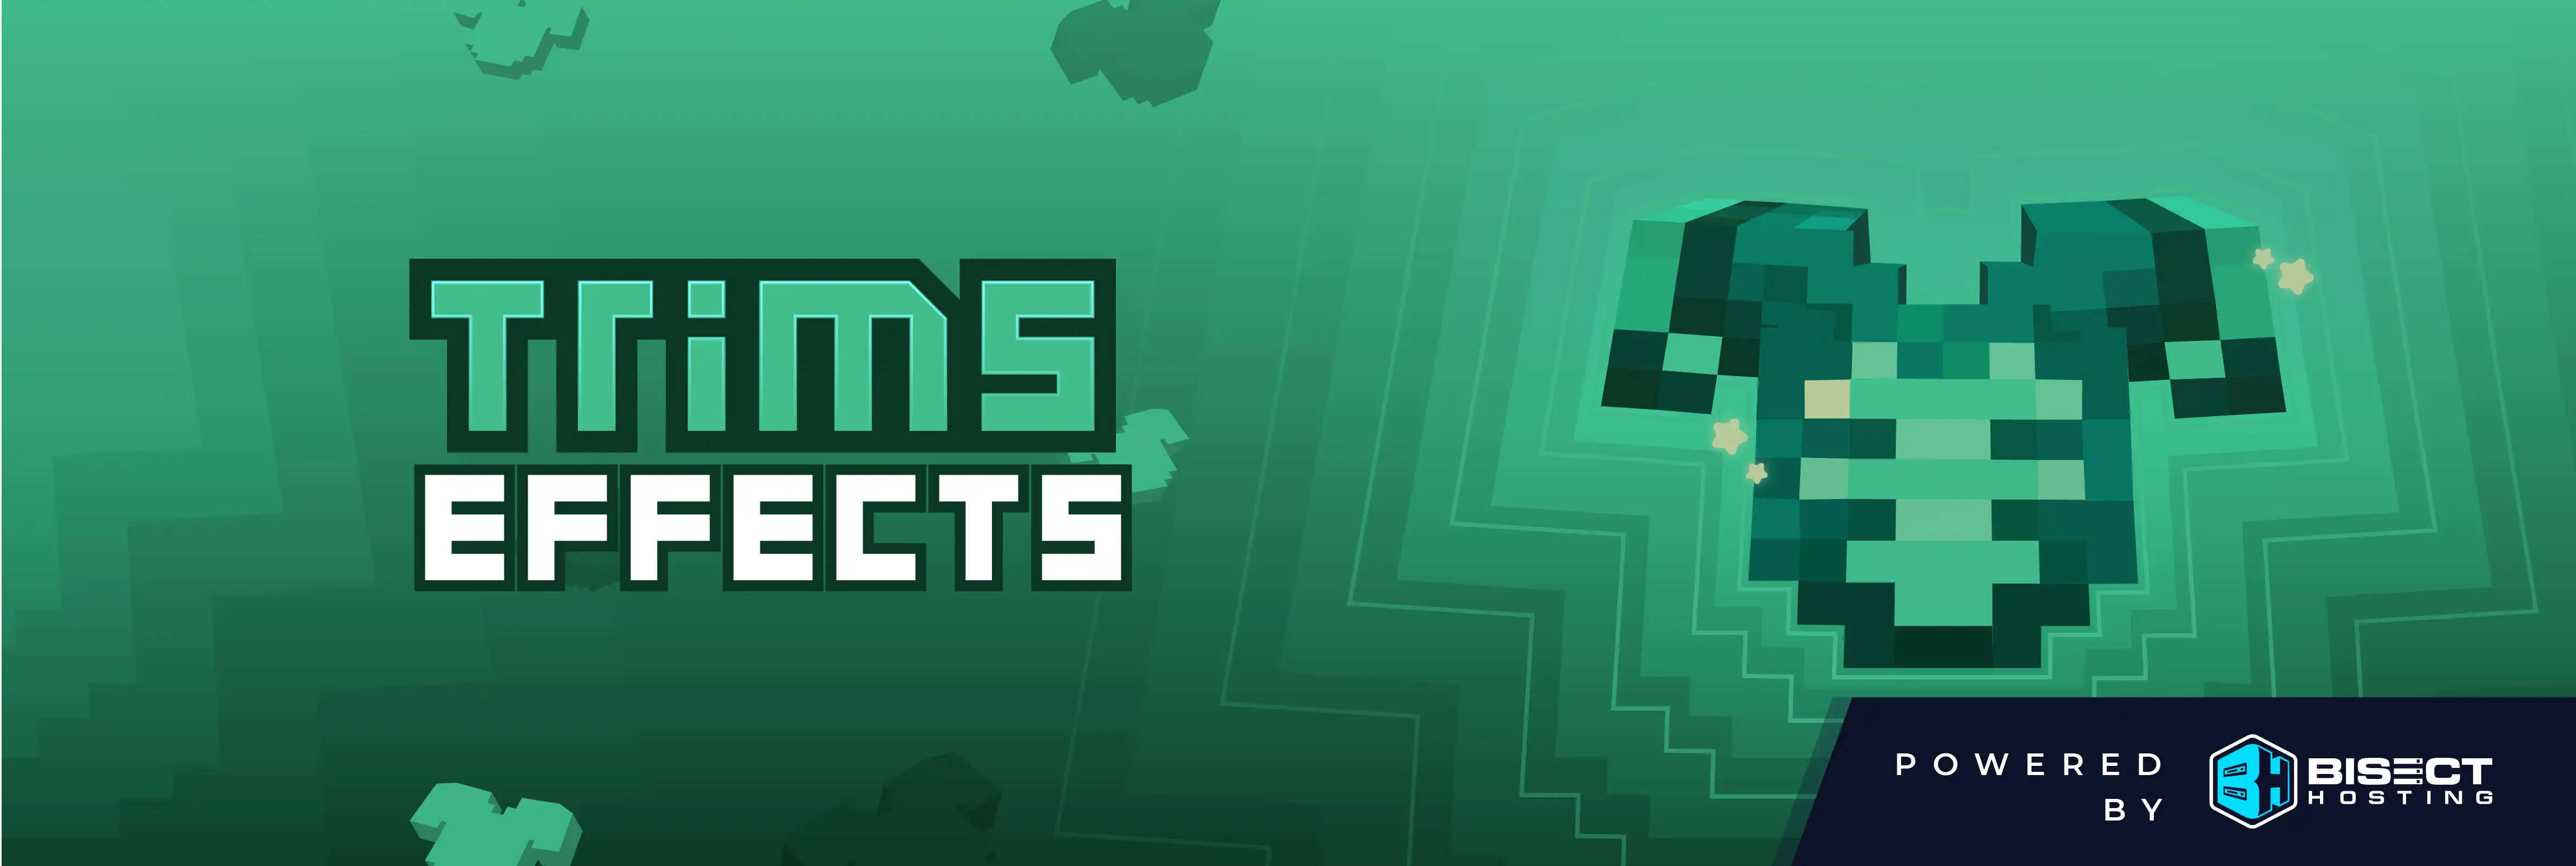 TRIMS EFFECTS BANNER